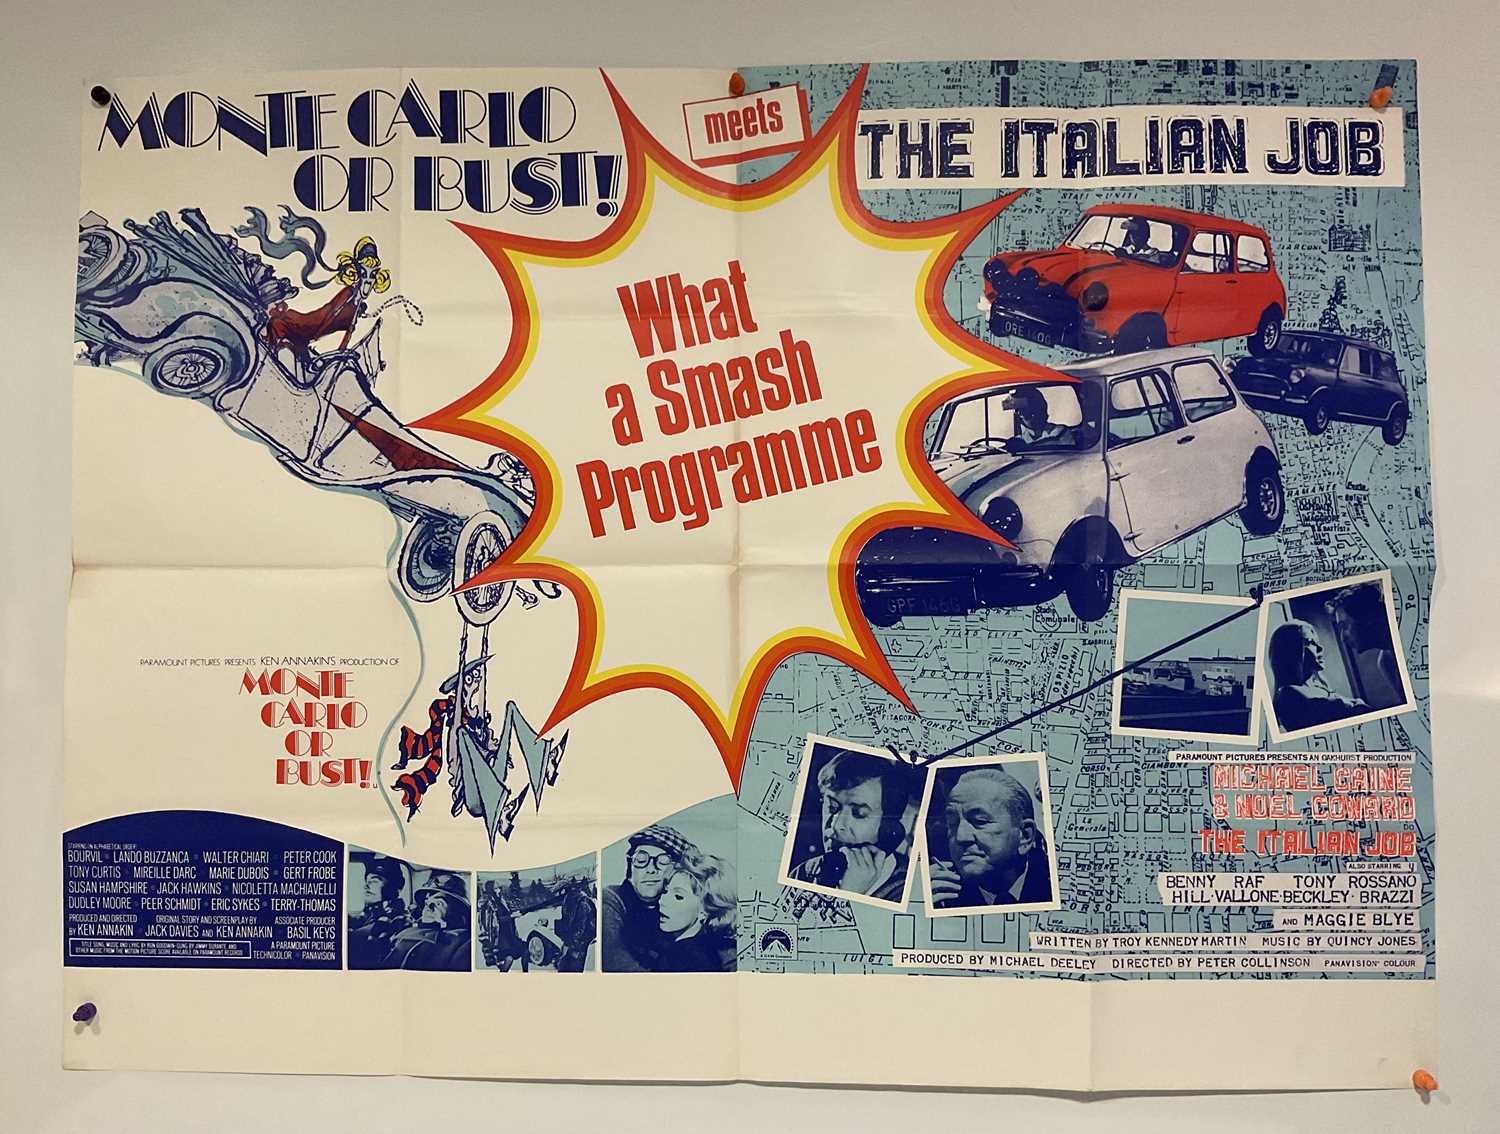 MONTE CARLO OR BUST! meets THE ITALIAN JOB (1970s) - scarce to find UK Quad double bill film